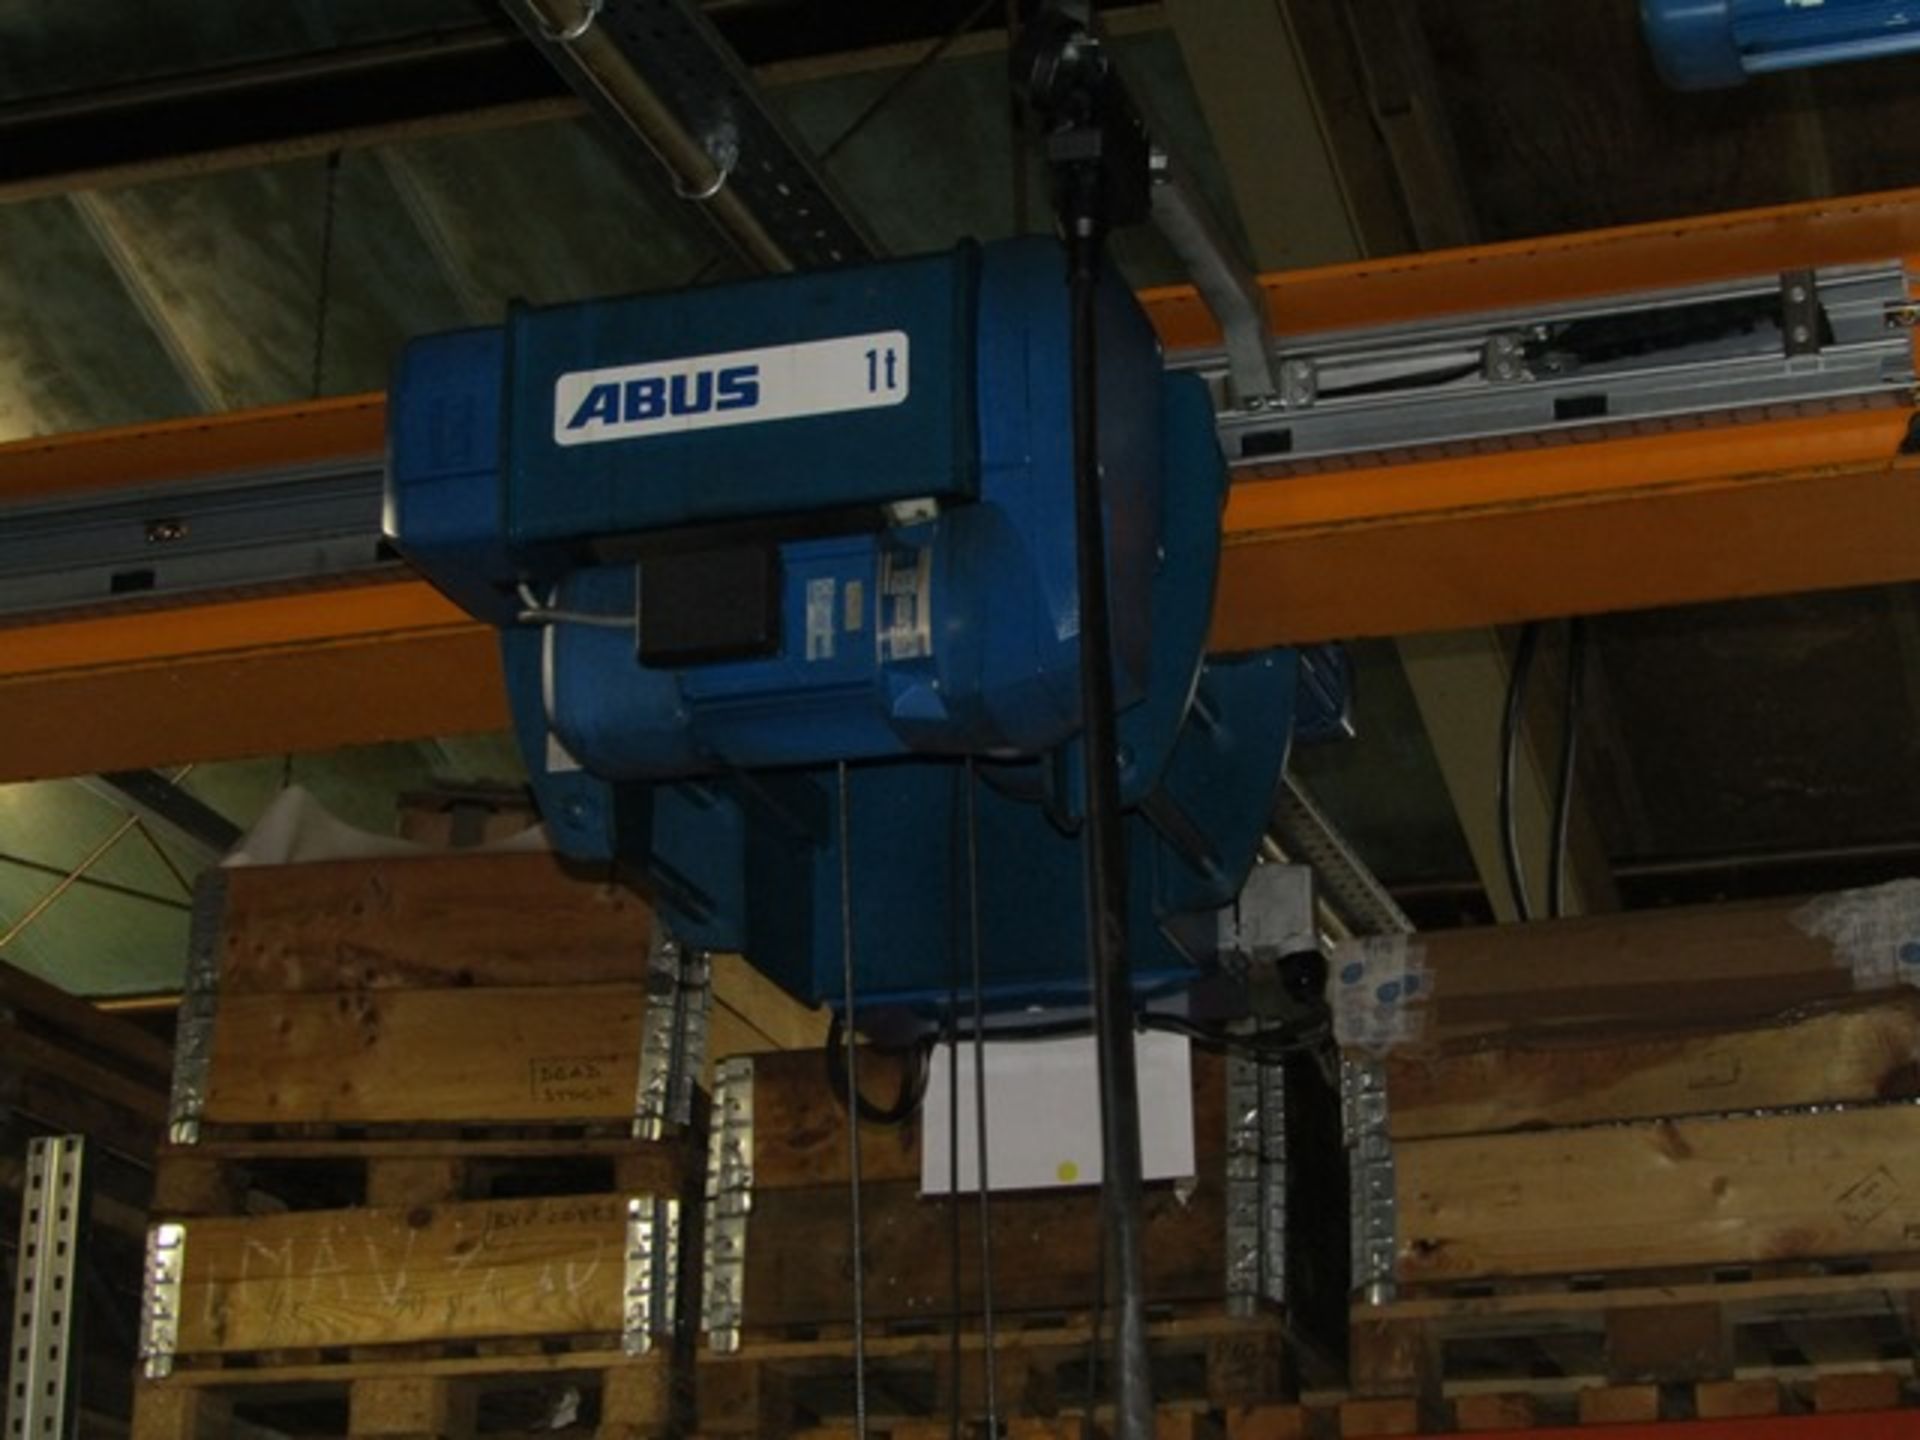 Abus 1 ton overhead travelling electric gantry crane, serial no: 16258516-1, approx 5.5m span x - Image 6 of 9